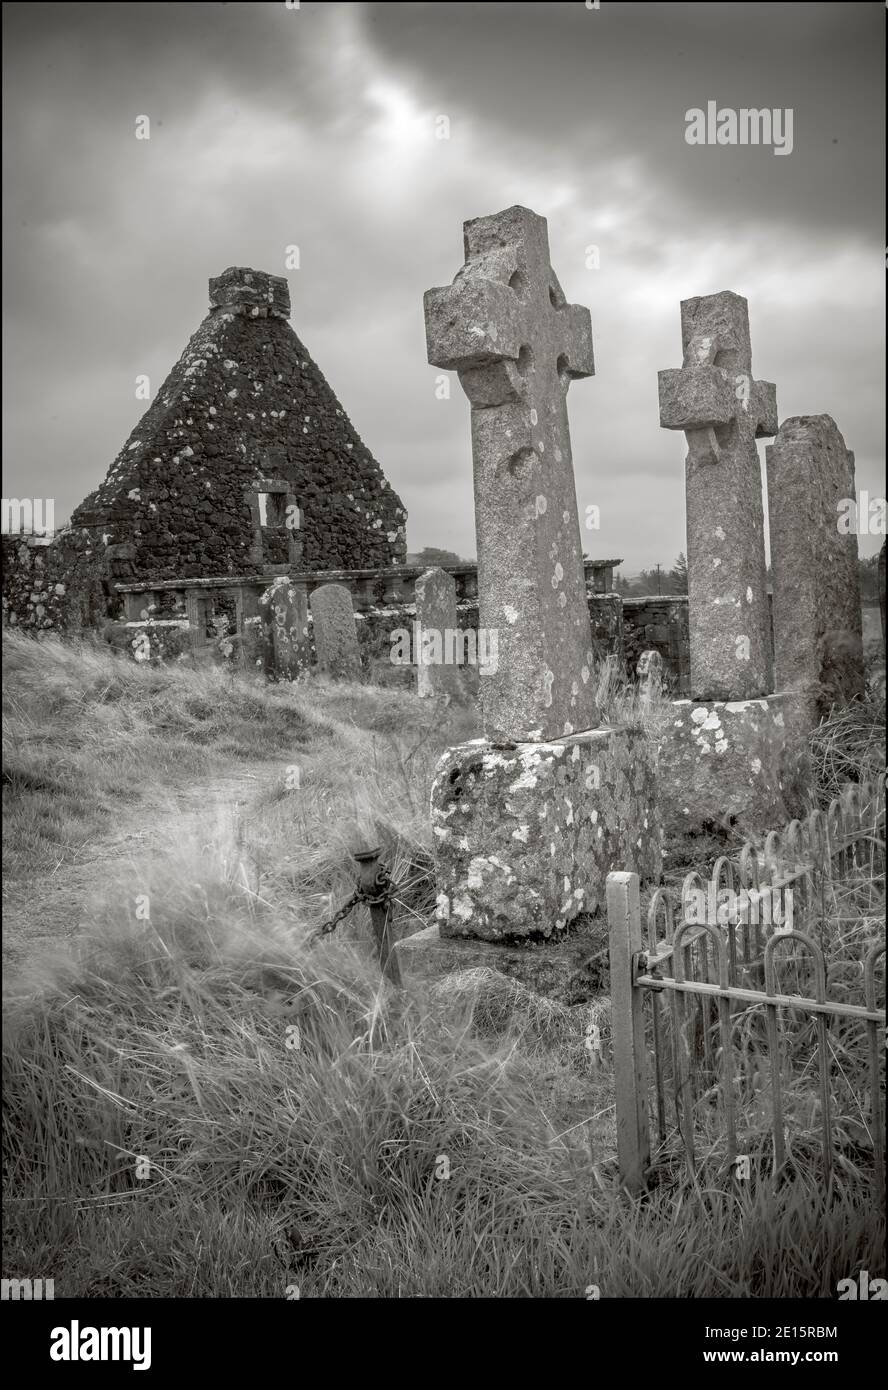 Isle of Skye, Dunvegan, Scotland: Stone celtic corsses in the Old St Mary's Church yard under stormy skies Stock Photo